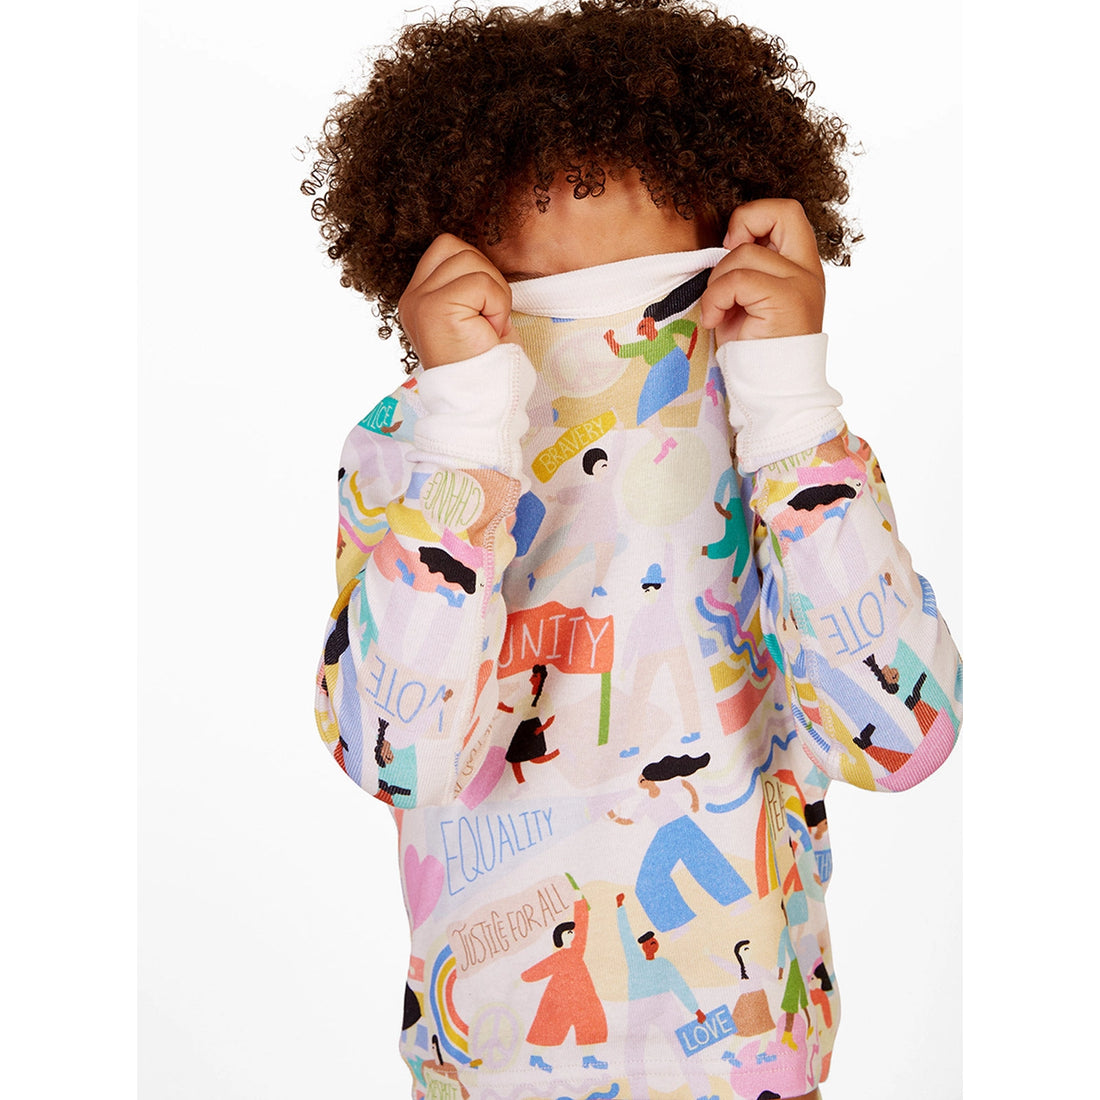 child covering their face in pajamas